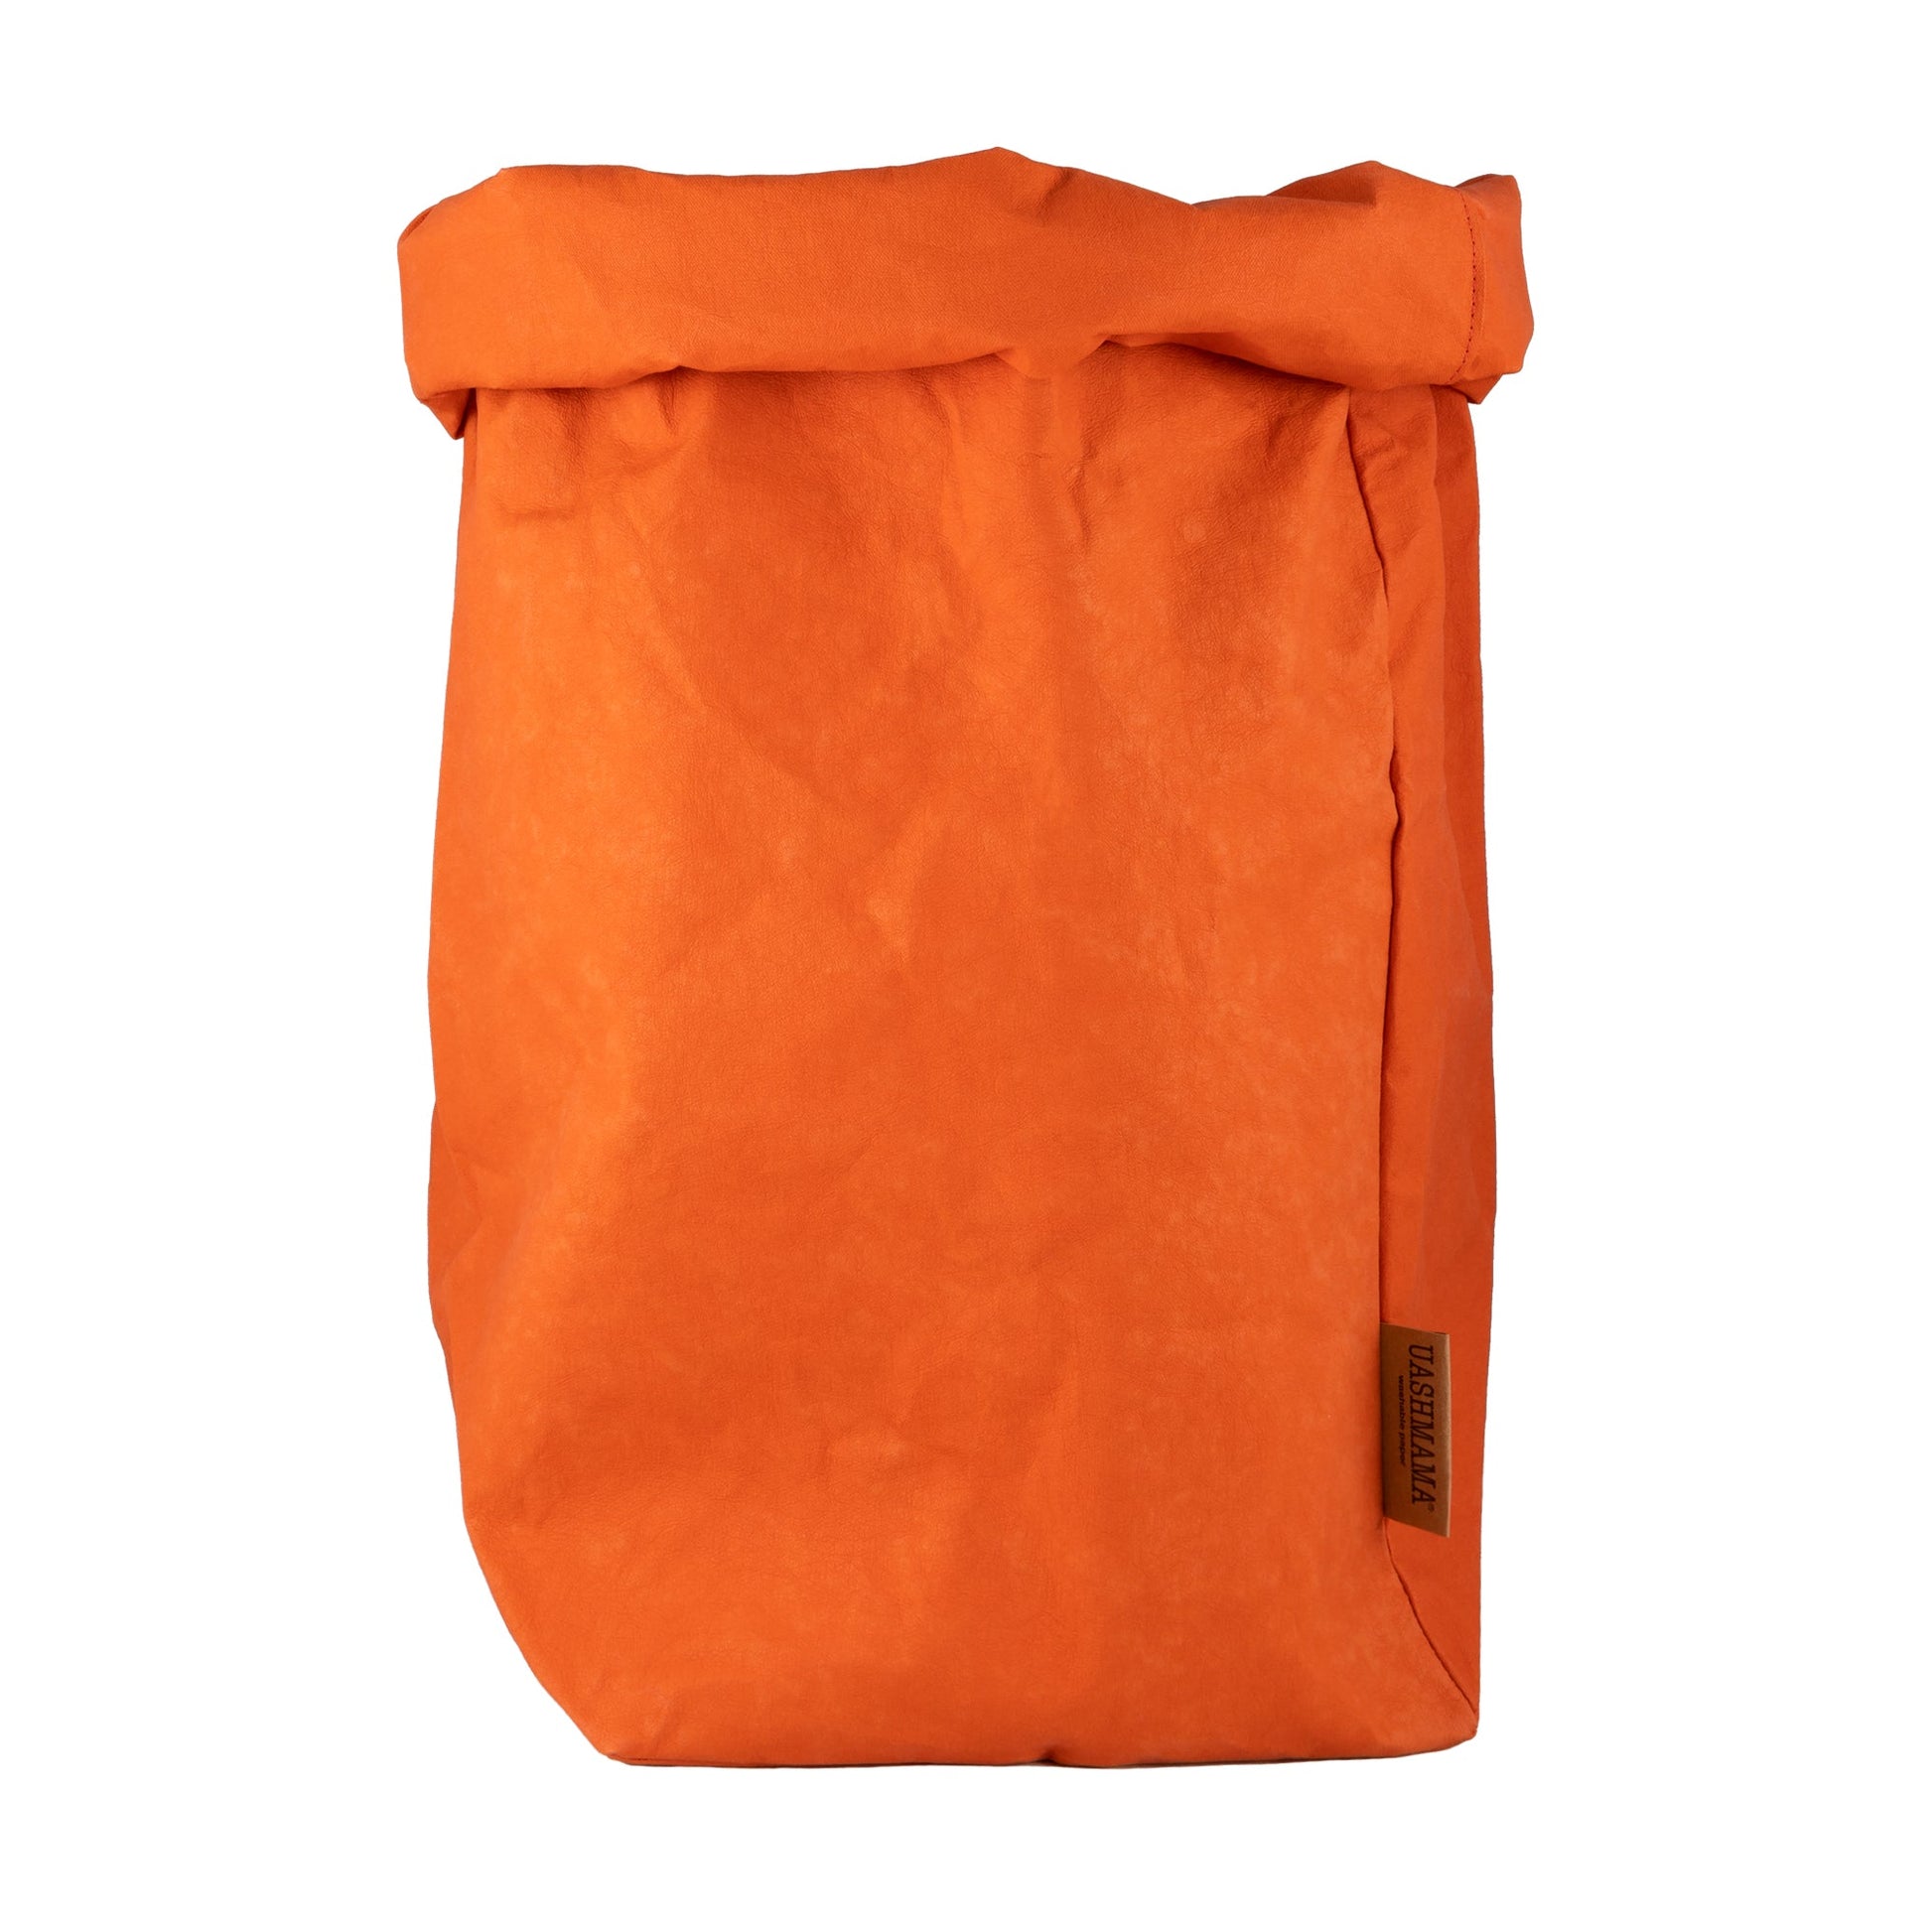 A washable paper bag is shown. The bag is rolled down at the top and features a UASHMAMA logo label on the bottom left corner. The bag pictured is the gigantic size in orange.